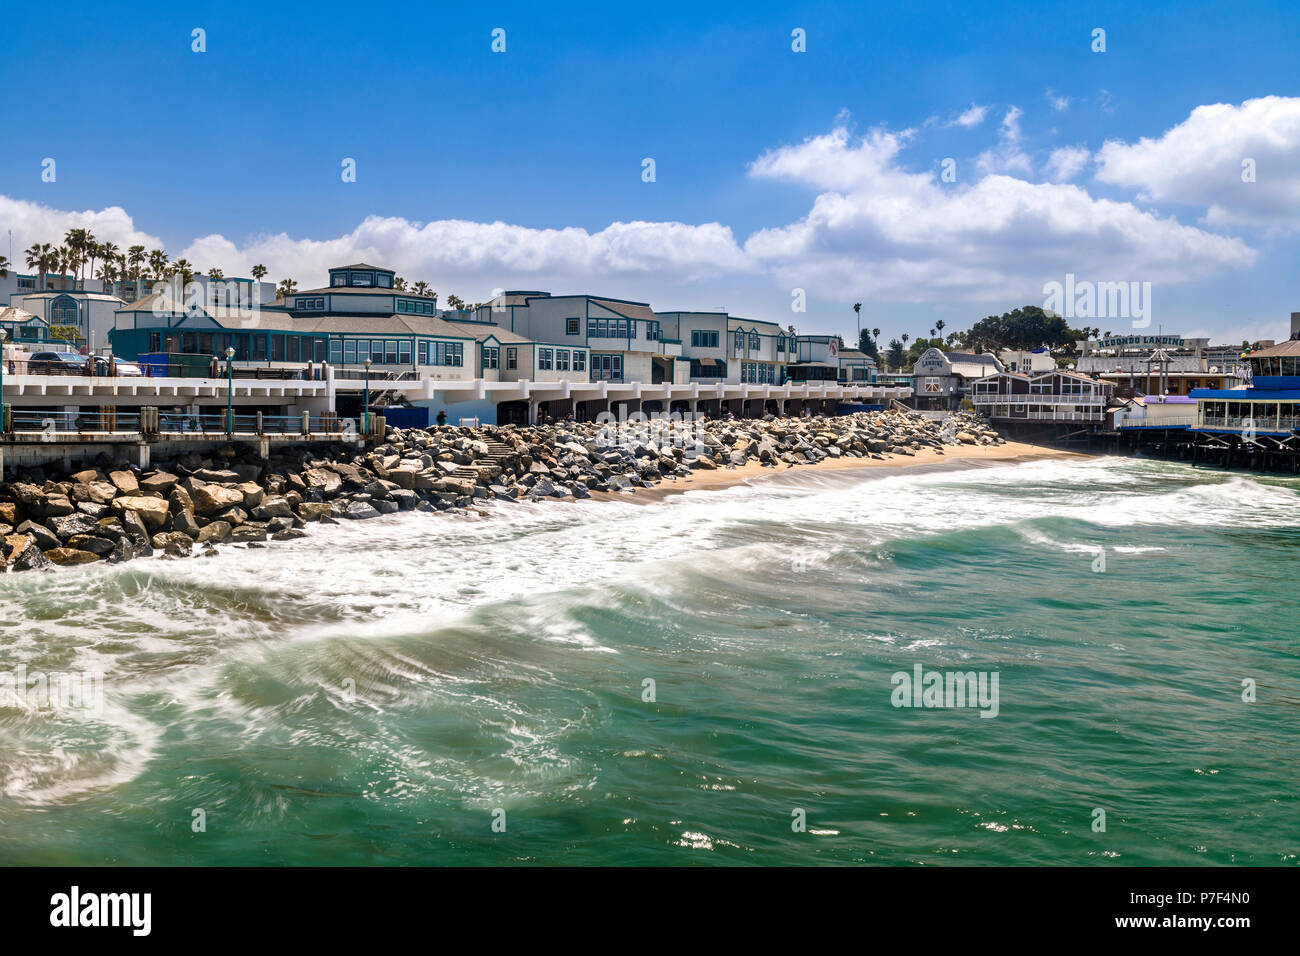 The Redondo Beach boardwalk in Southern California is lined with restaurants, housing and a nice beach. Stock Photo